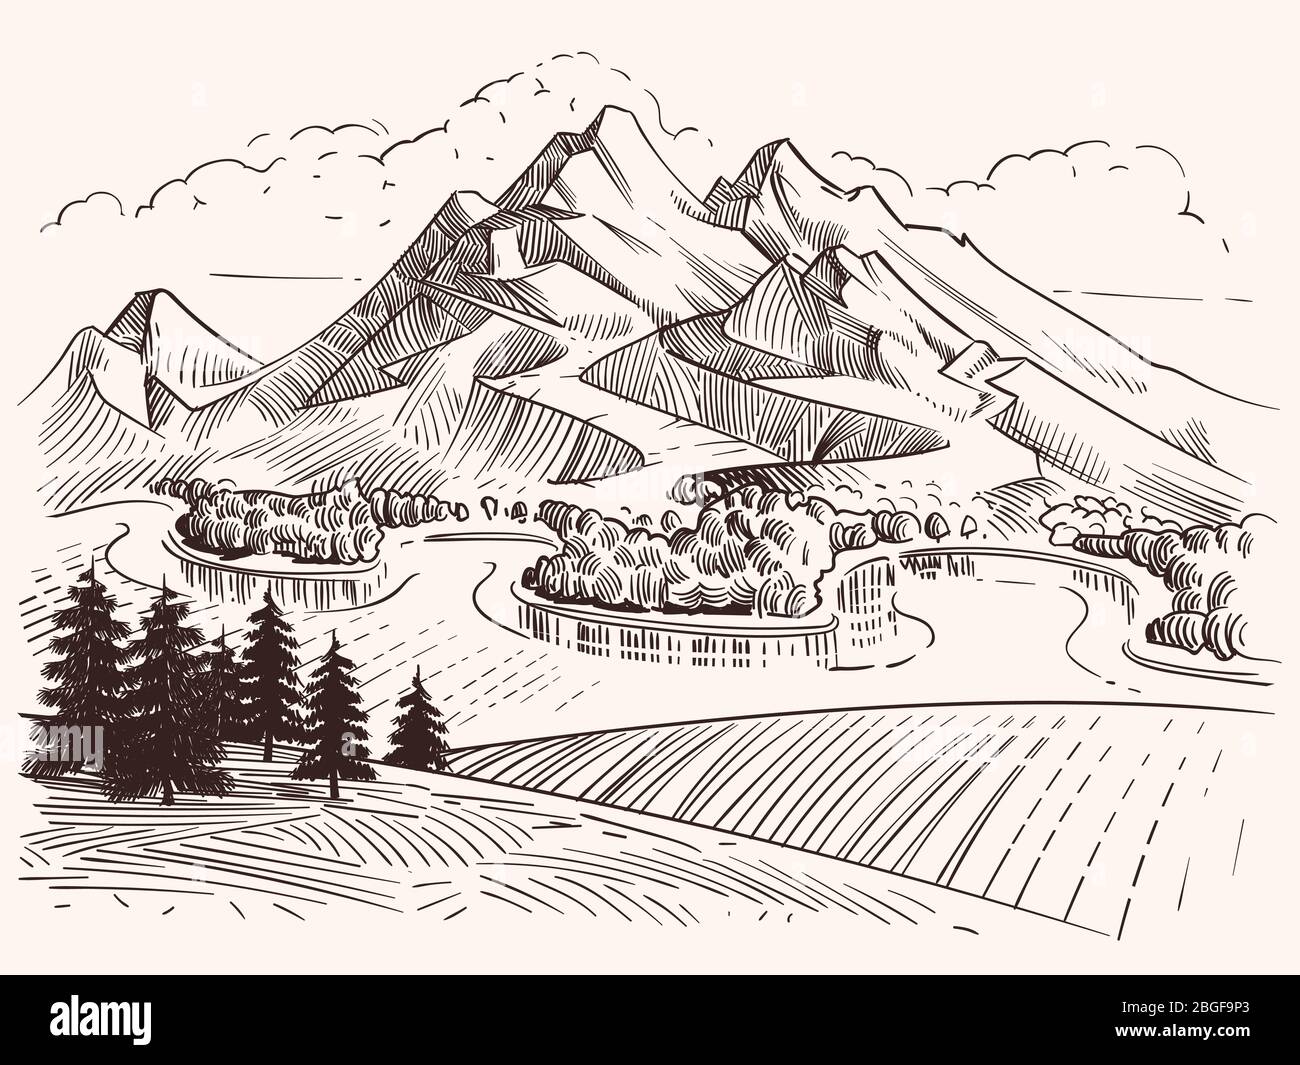 Landscape Drawing Ideas  For Beginners Step By Step  Cool Drawing Idea